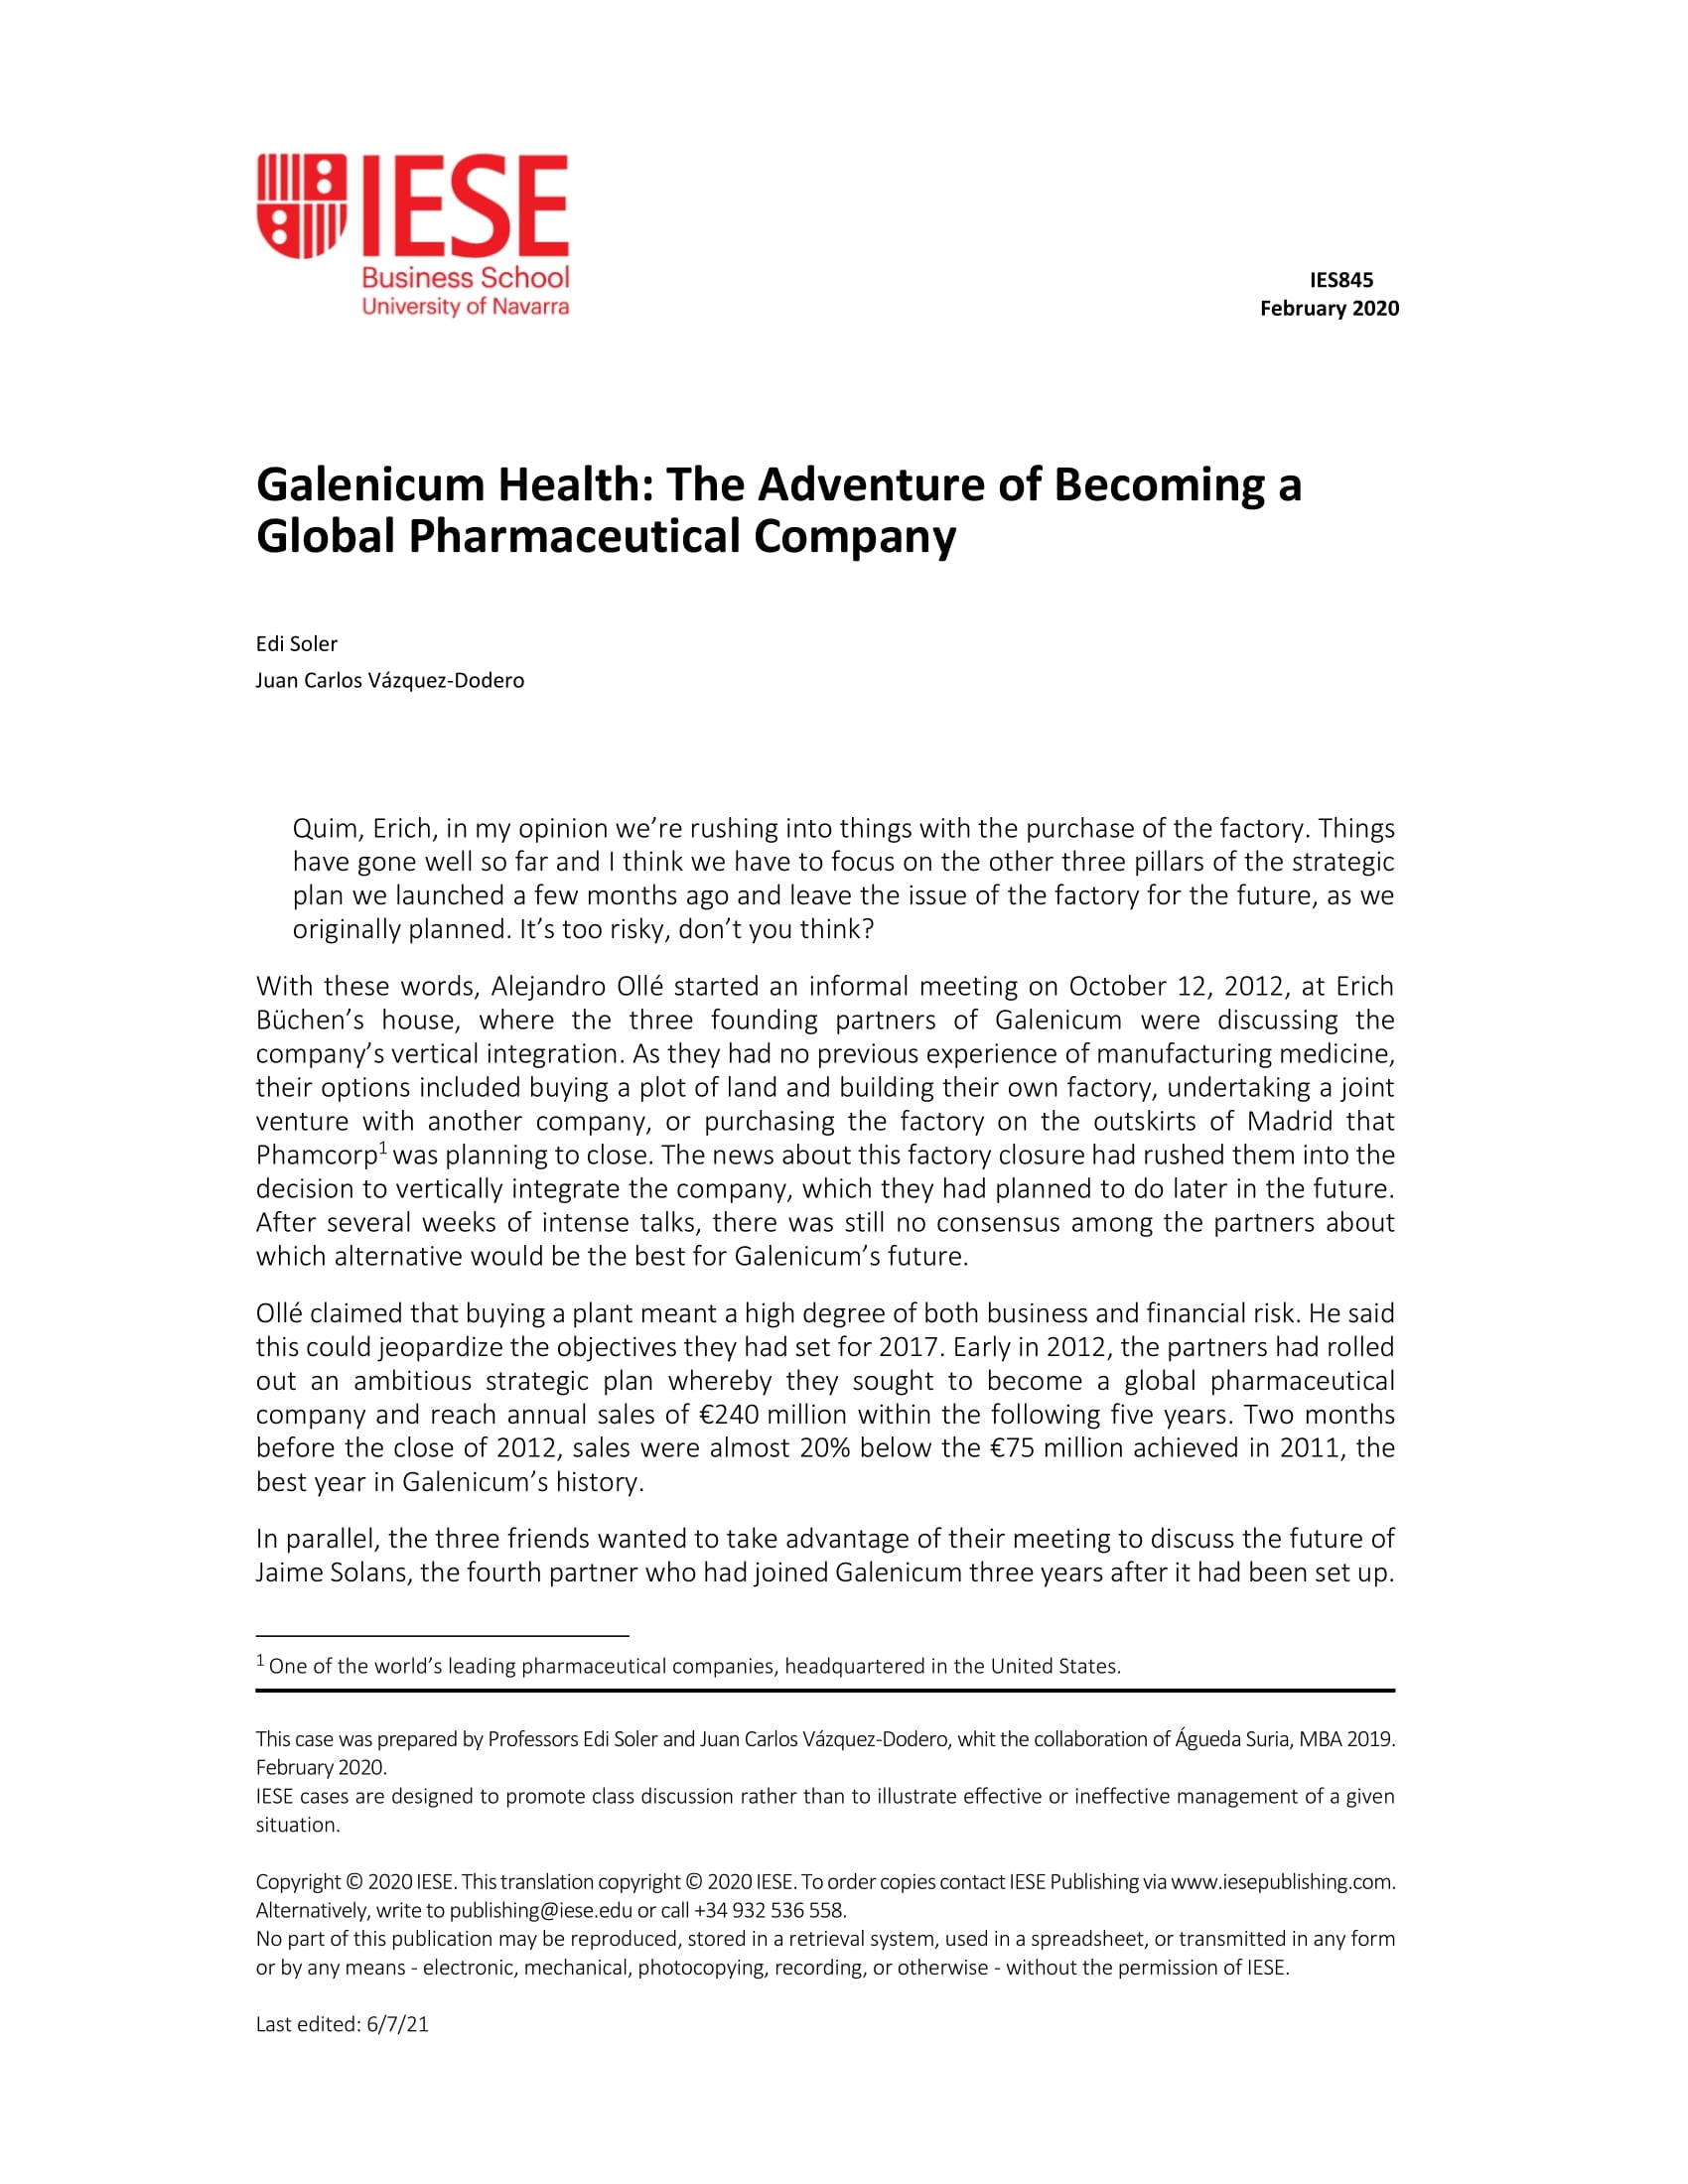 a　Global　Galenicum　Co　The　Harvard　Business　of　Publishing　Health:　Becoming　–　Adventure　Pharmaceutical　School